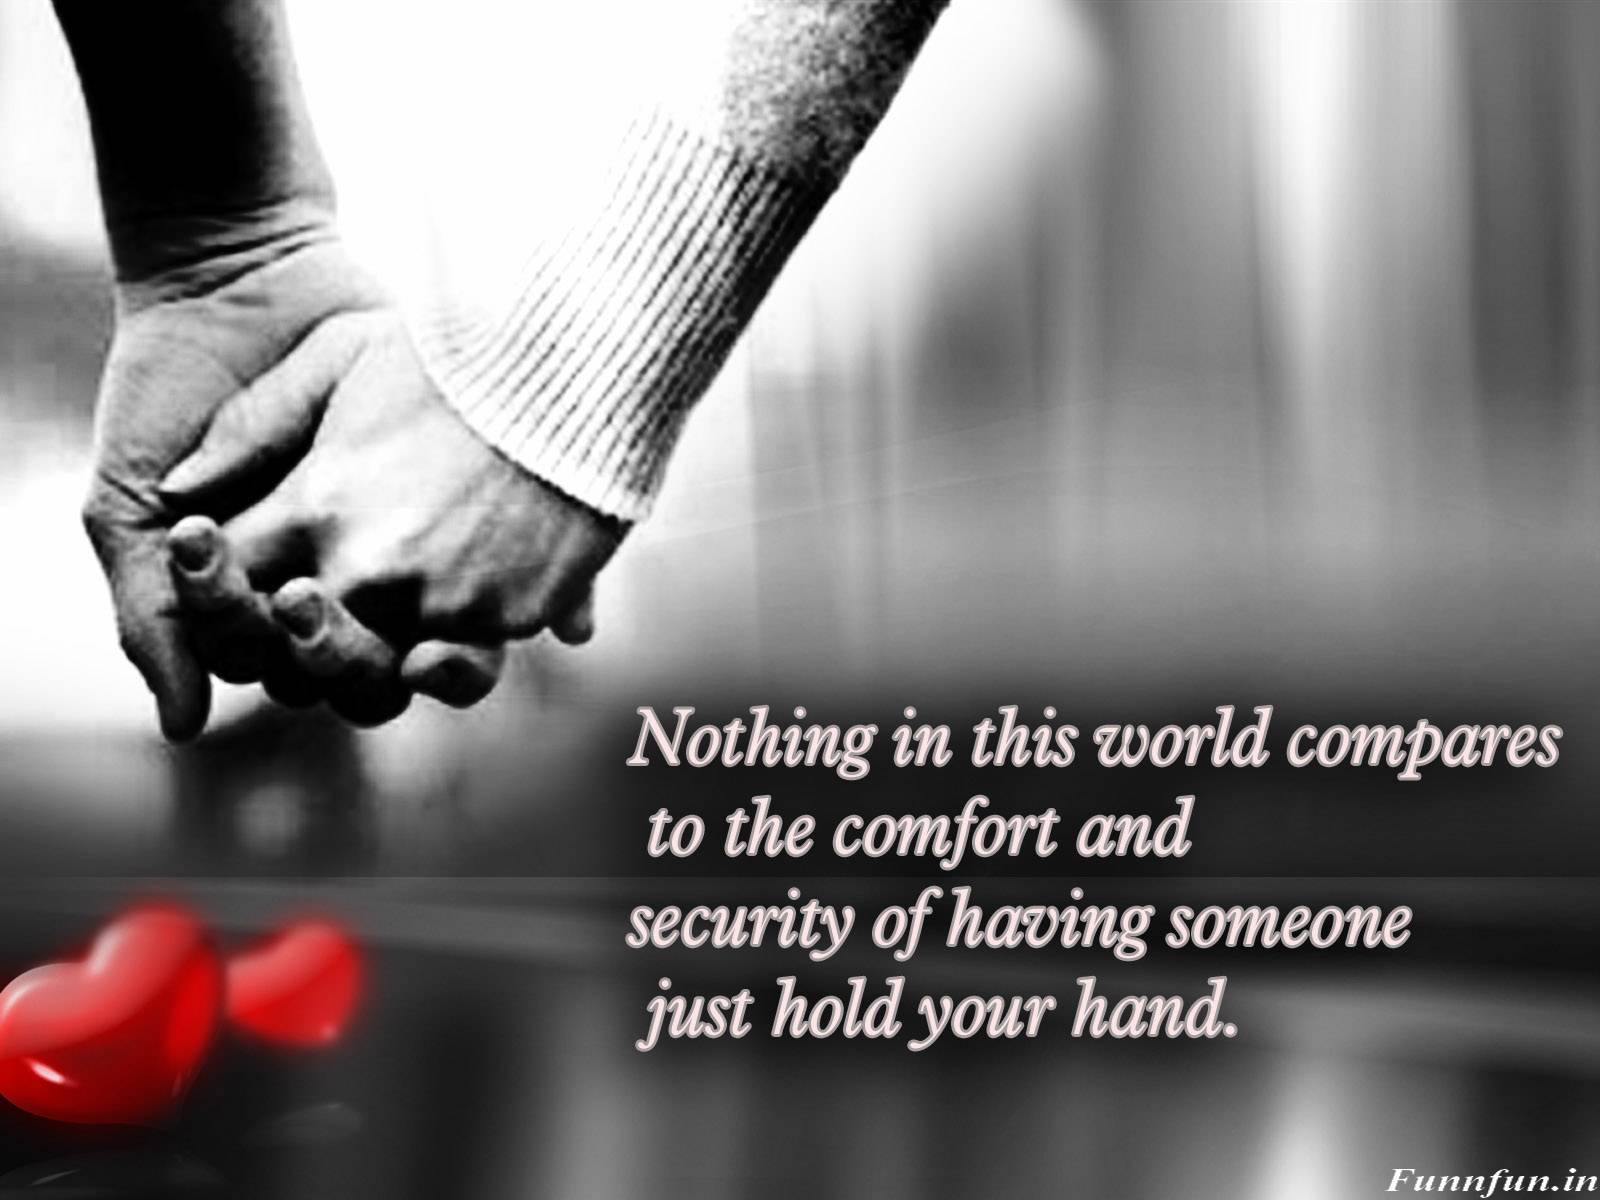 Boy And A Girl Holding Hands Wallpapers Wallpaper Cave